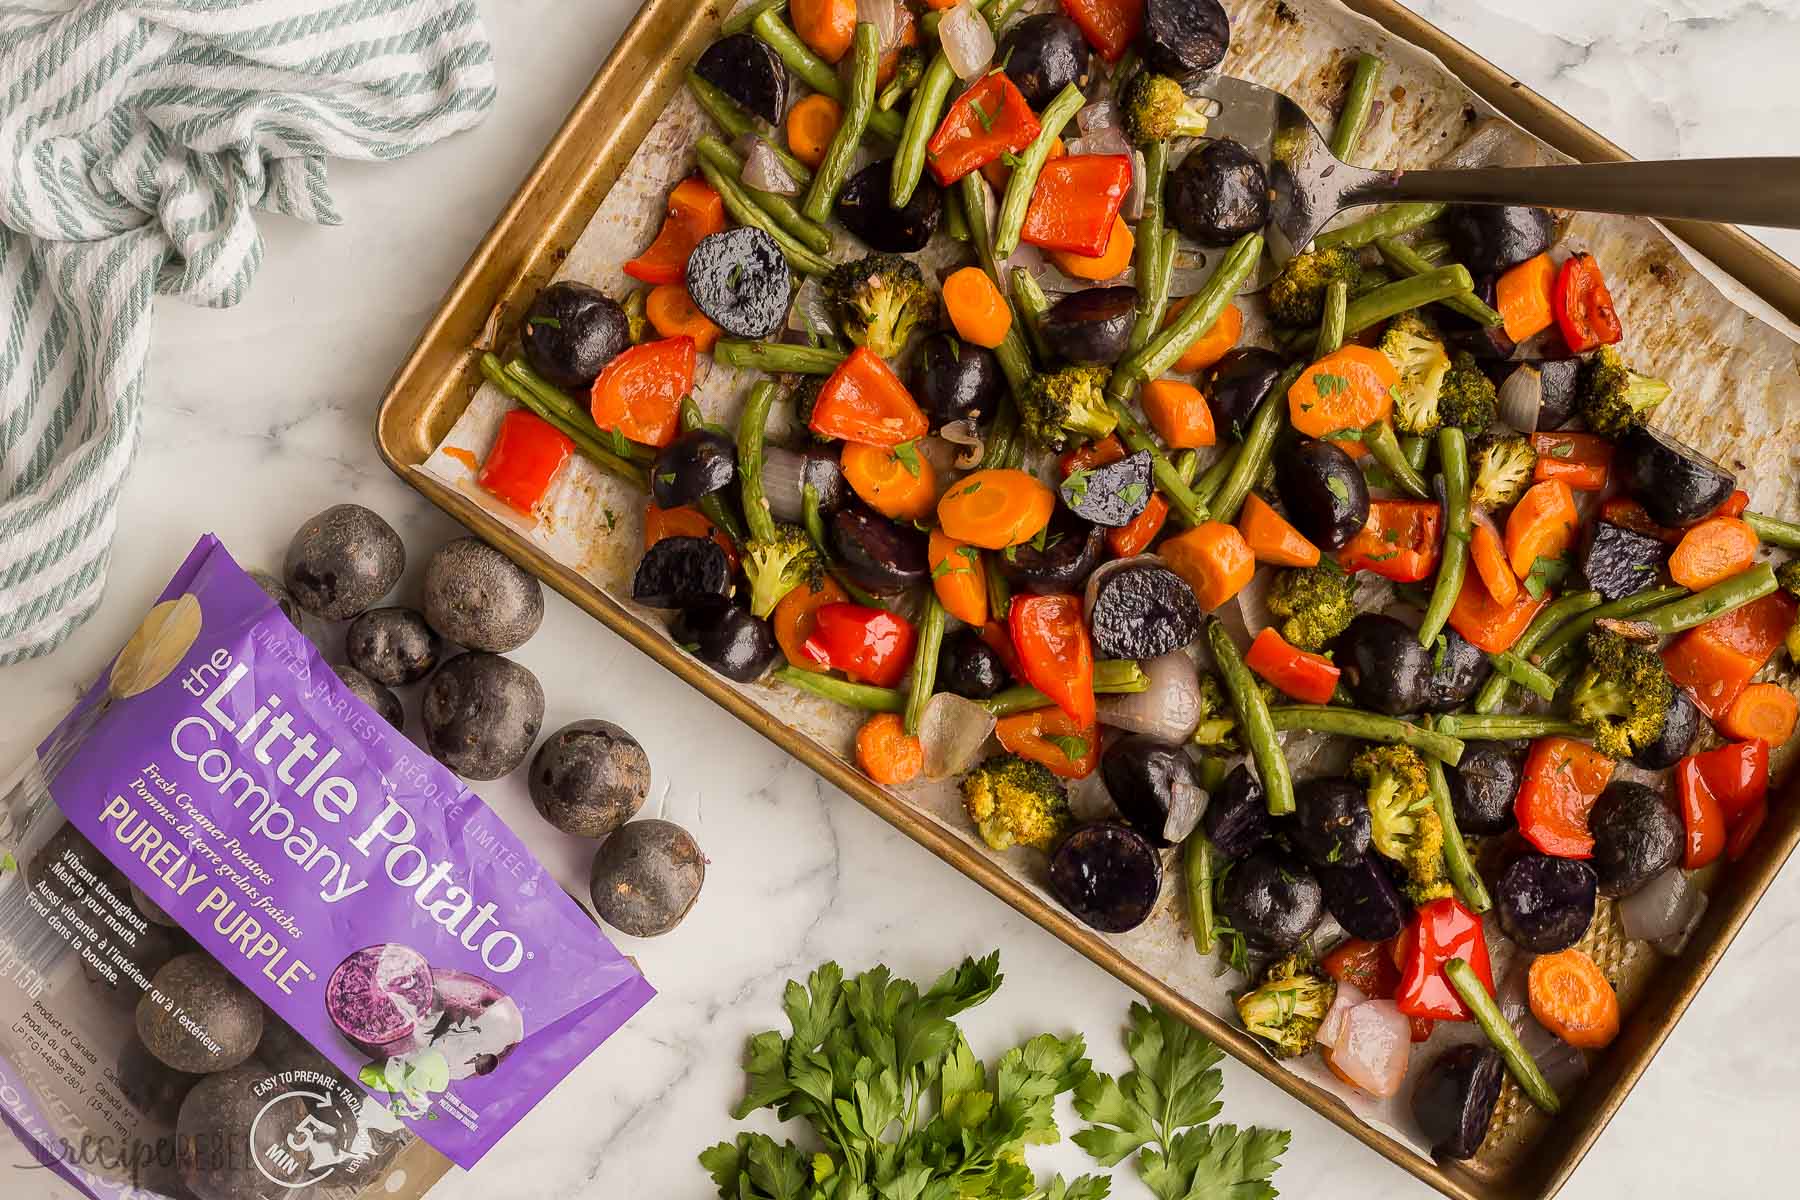 image of roasted vegetables with bag of purple potatoes